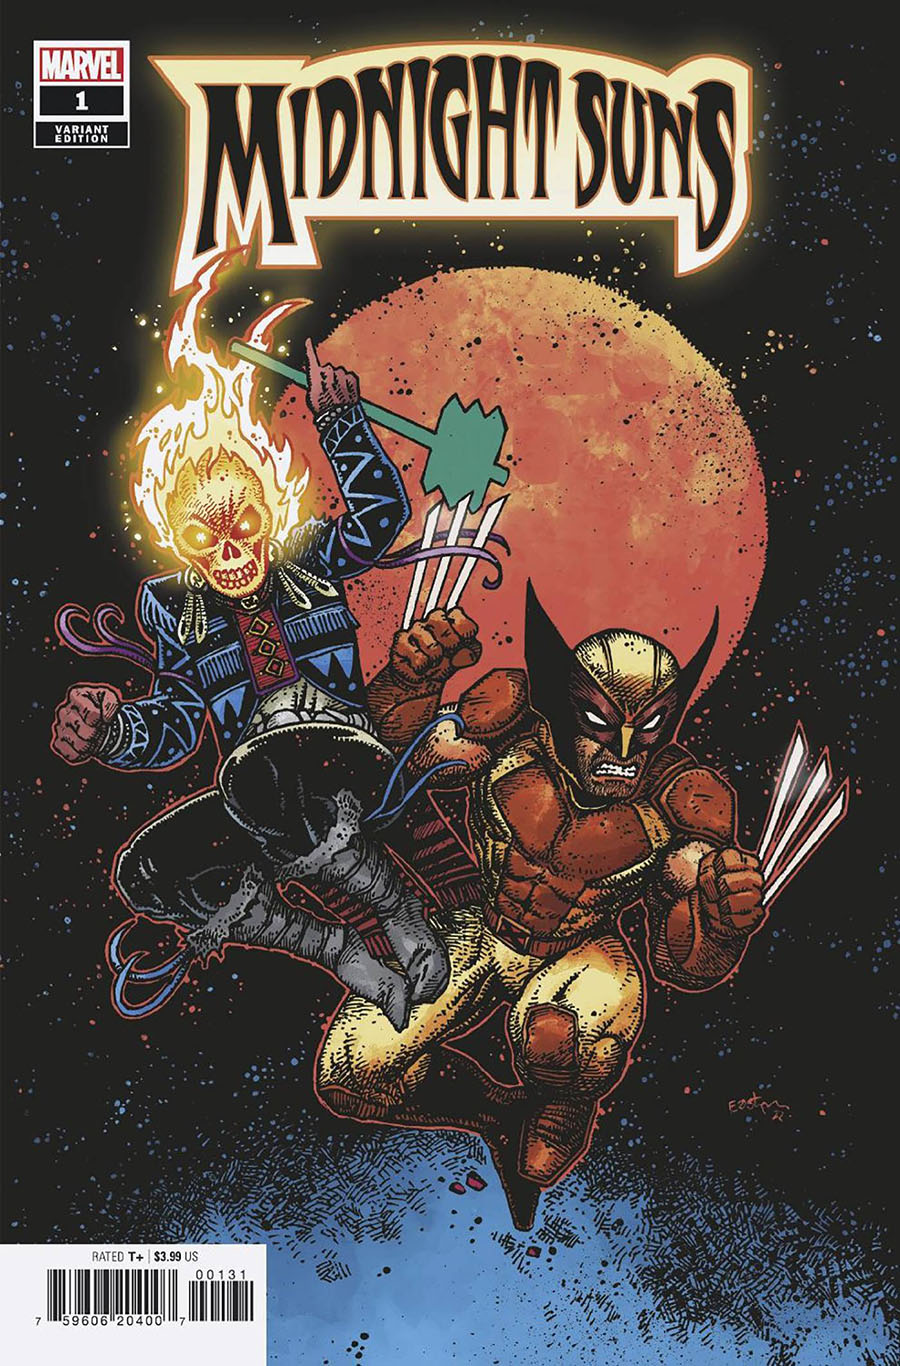 MARVEL'S MIDNIGHT SUNS were added to MARVEL SNAP as Variants which is cool,  but lacks some of the comics events Heroes such as Ghost Rider, Majik,  Morbius, Nico even Venom, anyone else